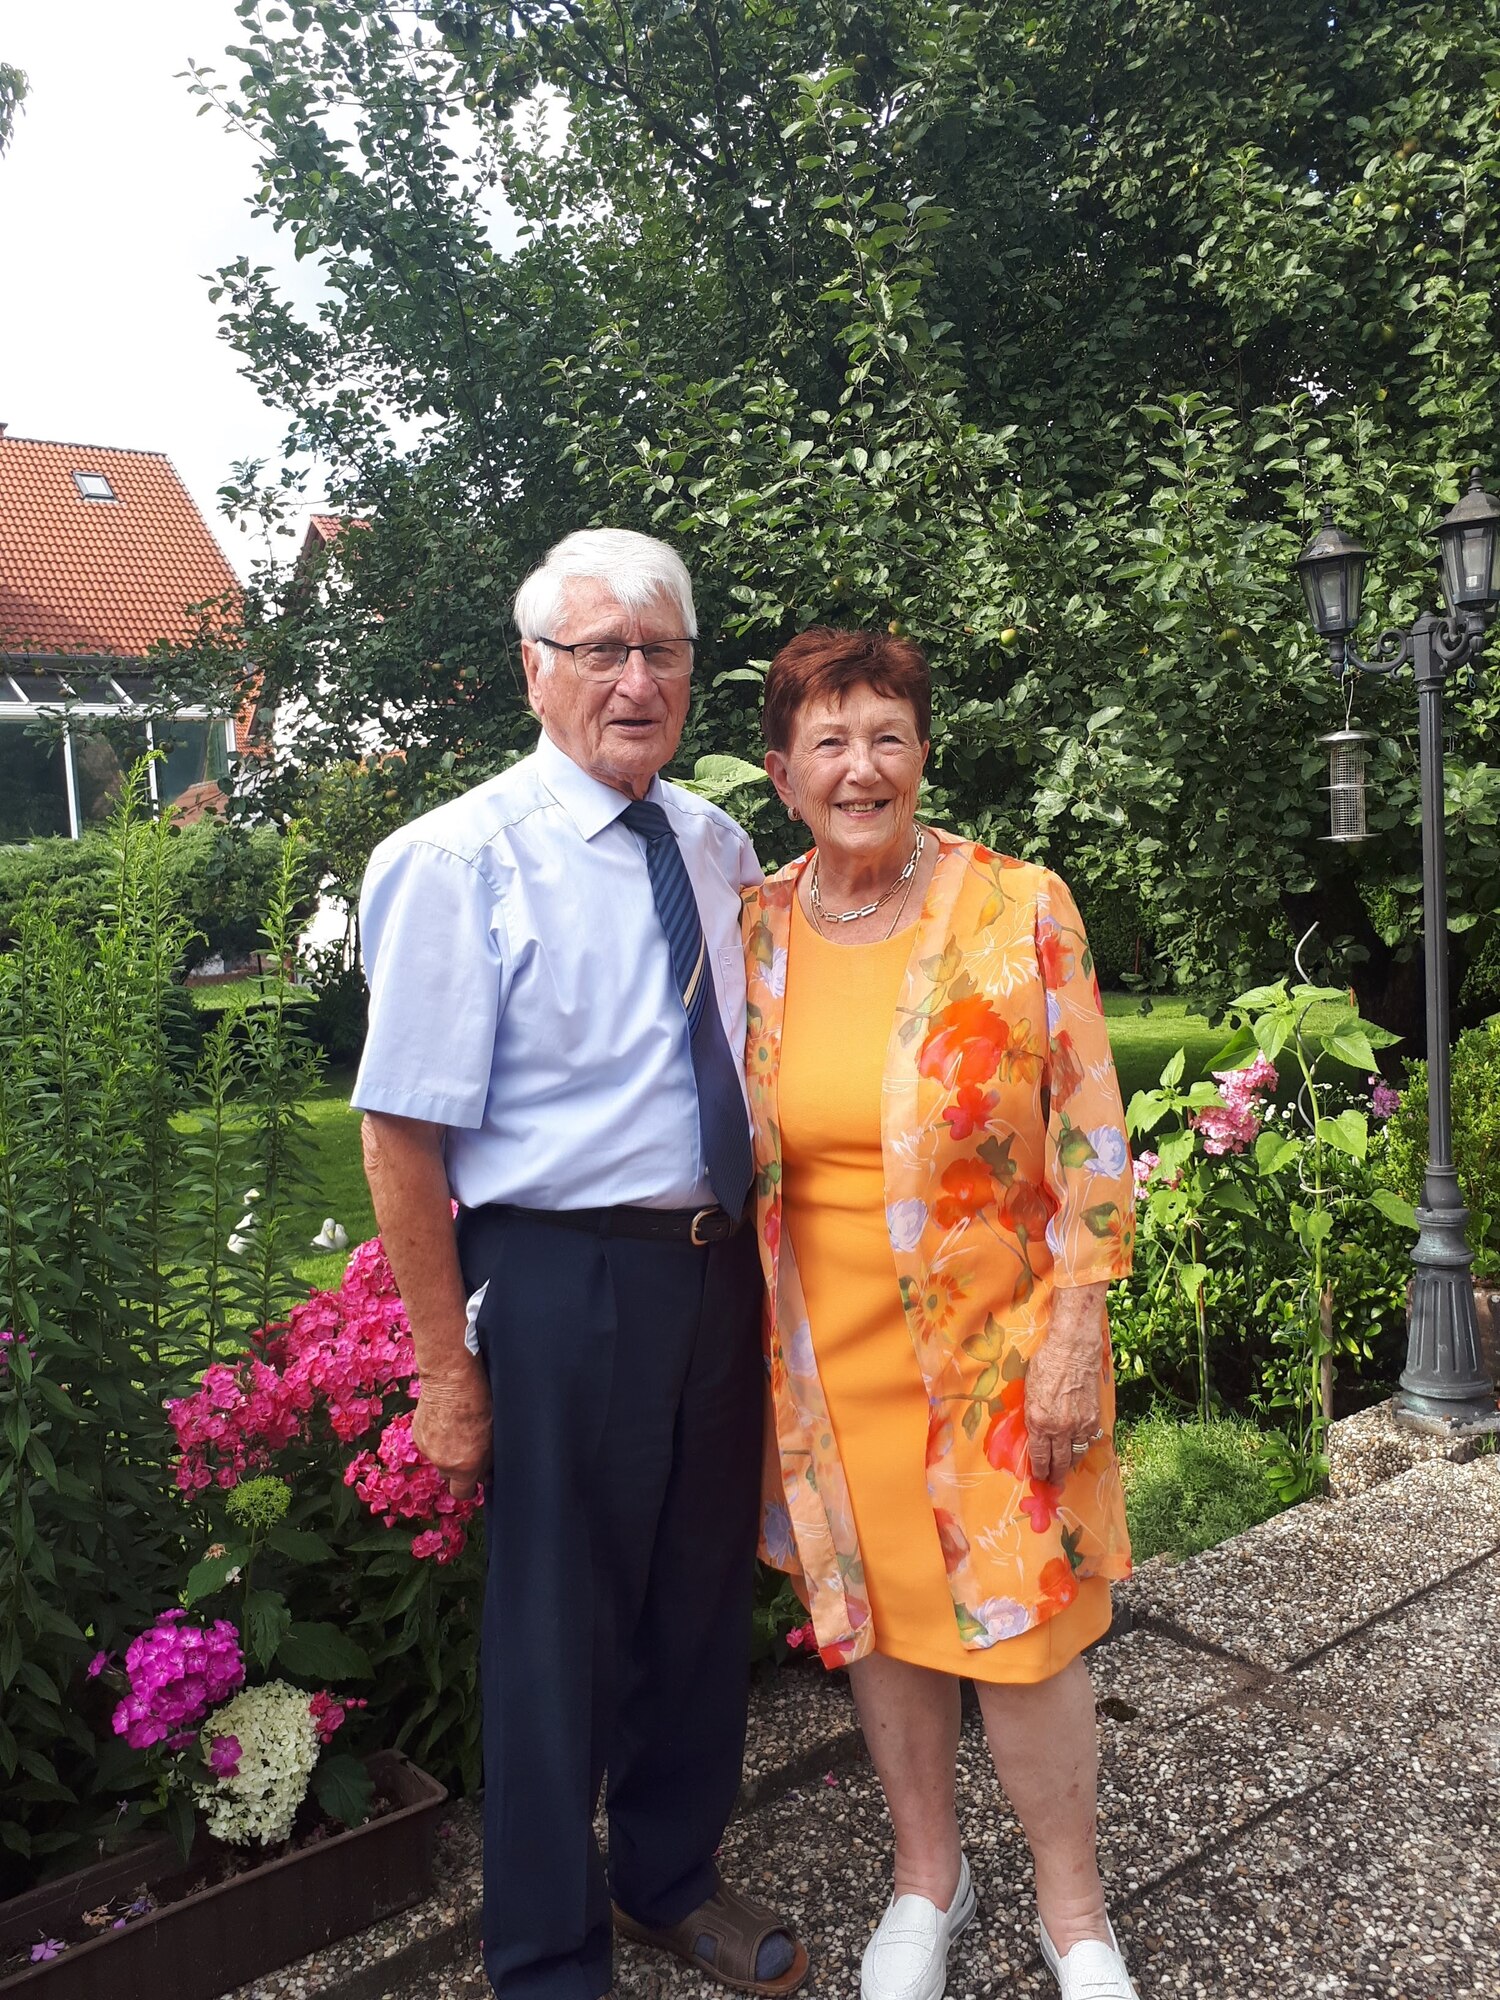 Hilde and her husband Ignaz recently celebrated their 65th wedding anniversary.